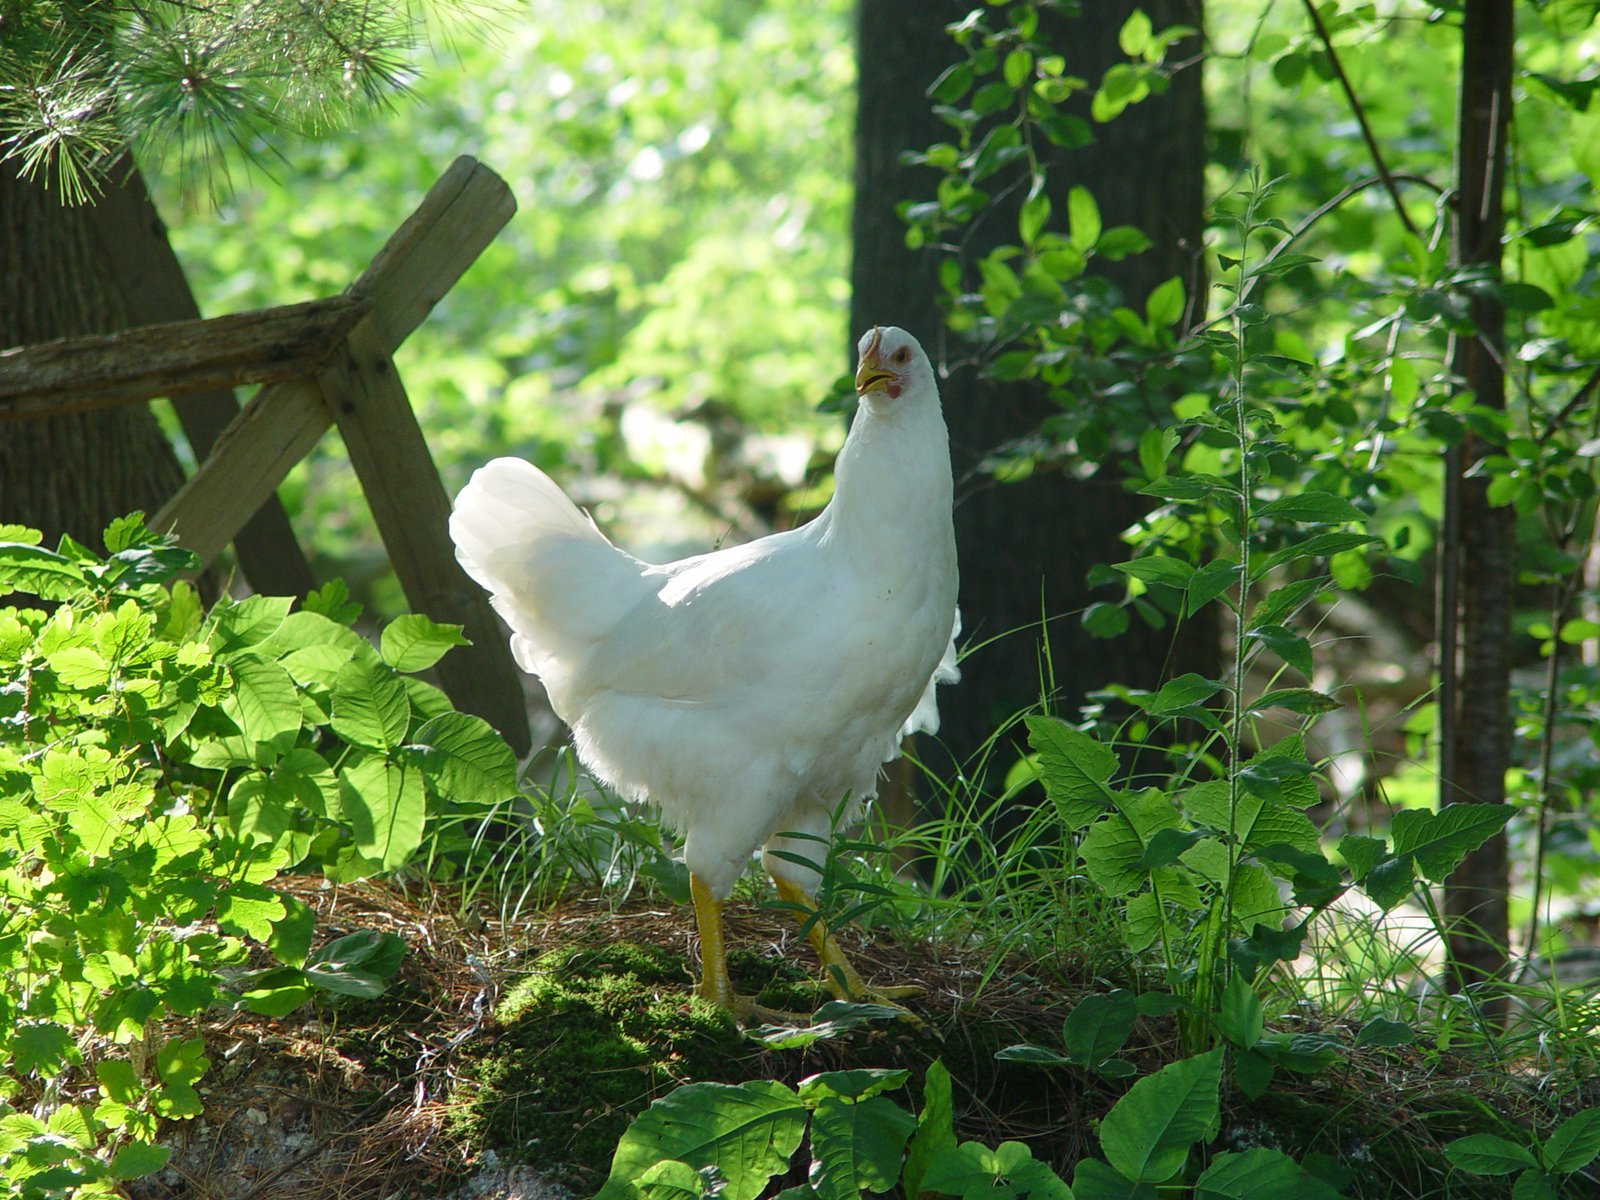 a white rooster walking around in the bushes